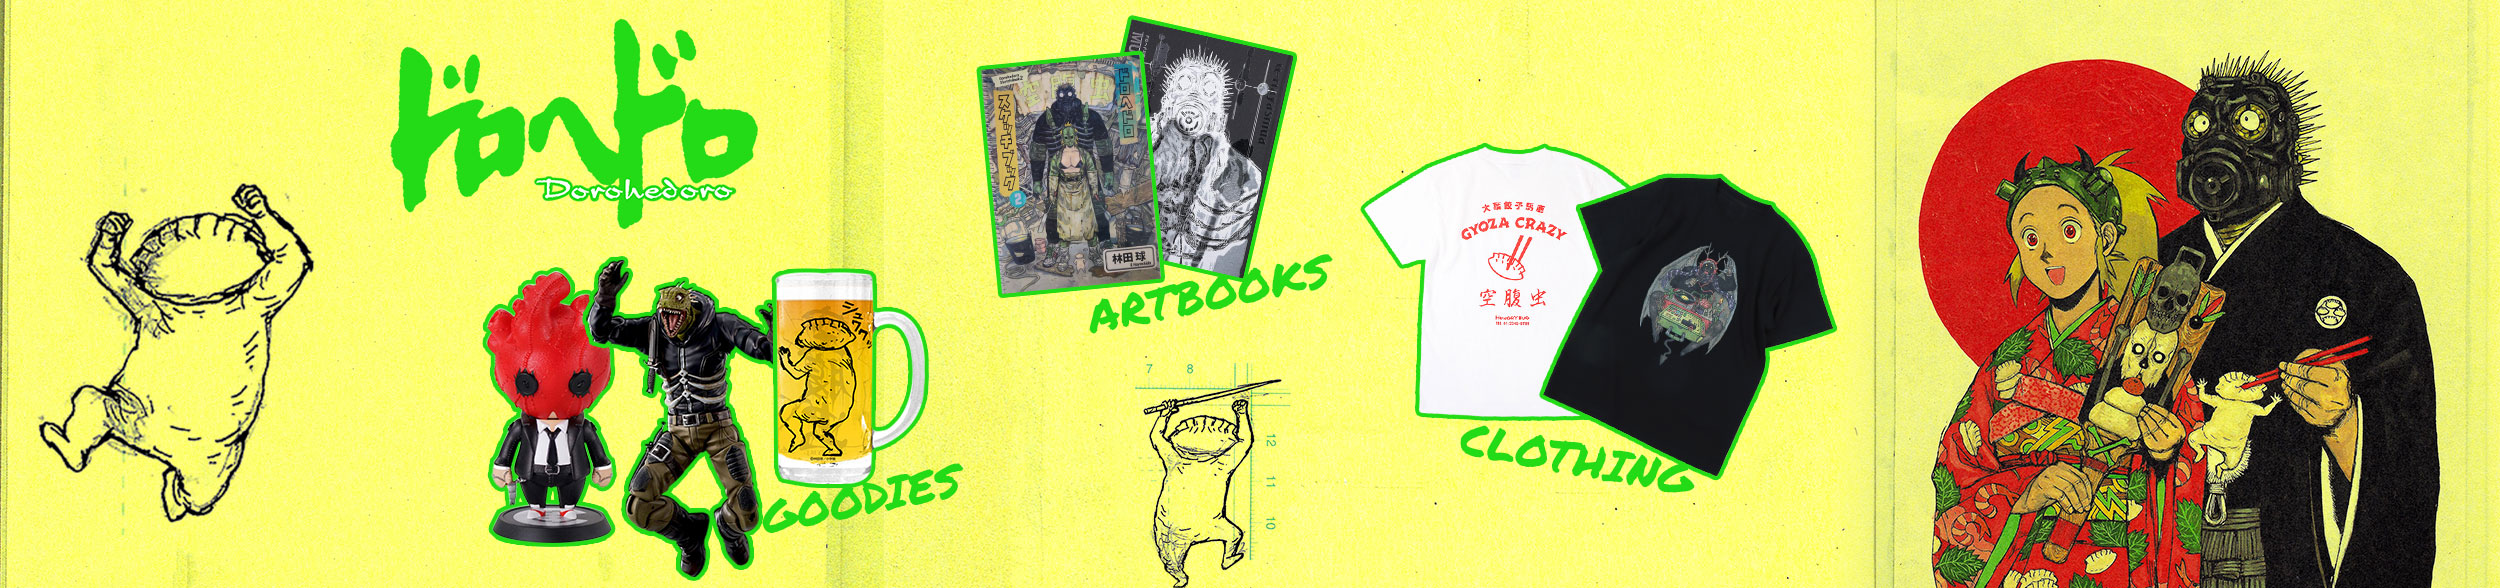 Artbooks, figurines, mugs, goodies, clothes... all our Dorohedoro products!